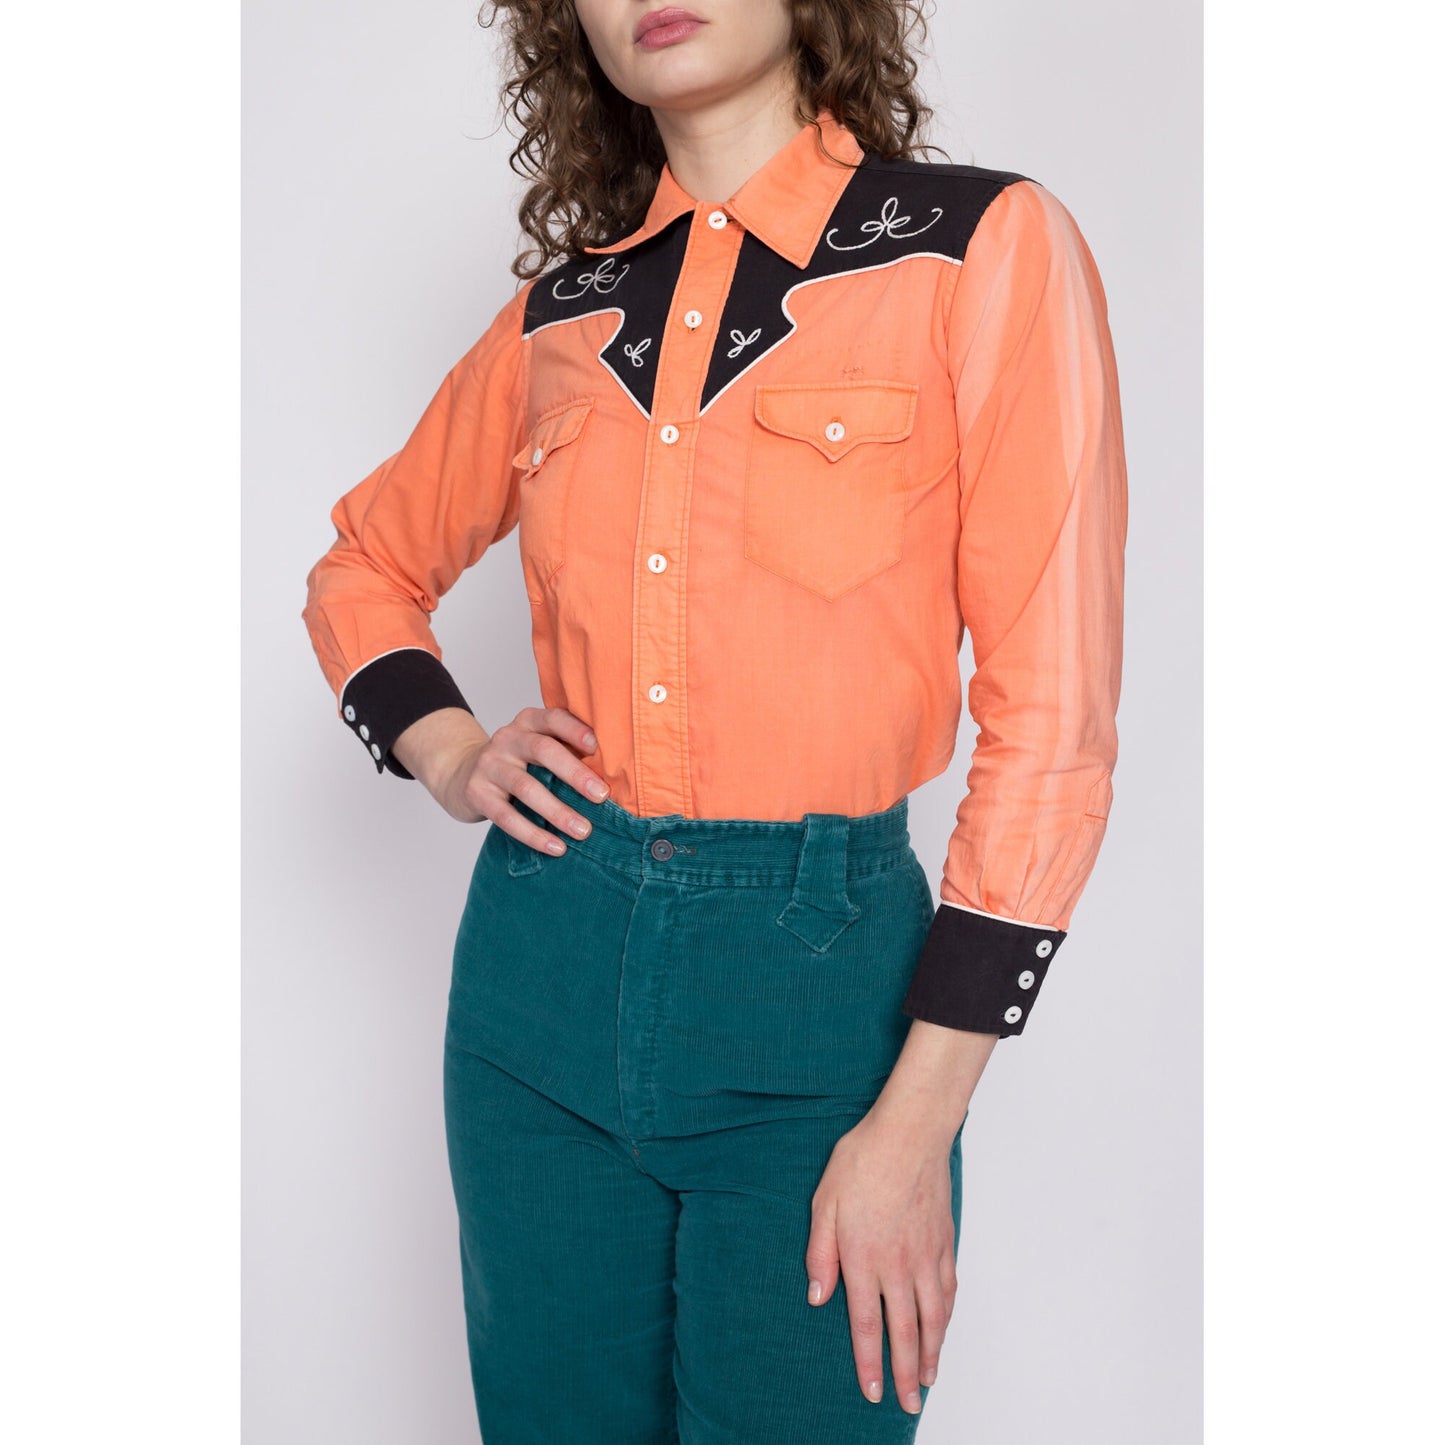 1950s Faded Orange Western Shirt - Unisex XS | Vintage 40s 50s Collared Button Up Rockabilly Top